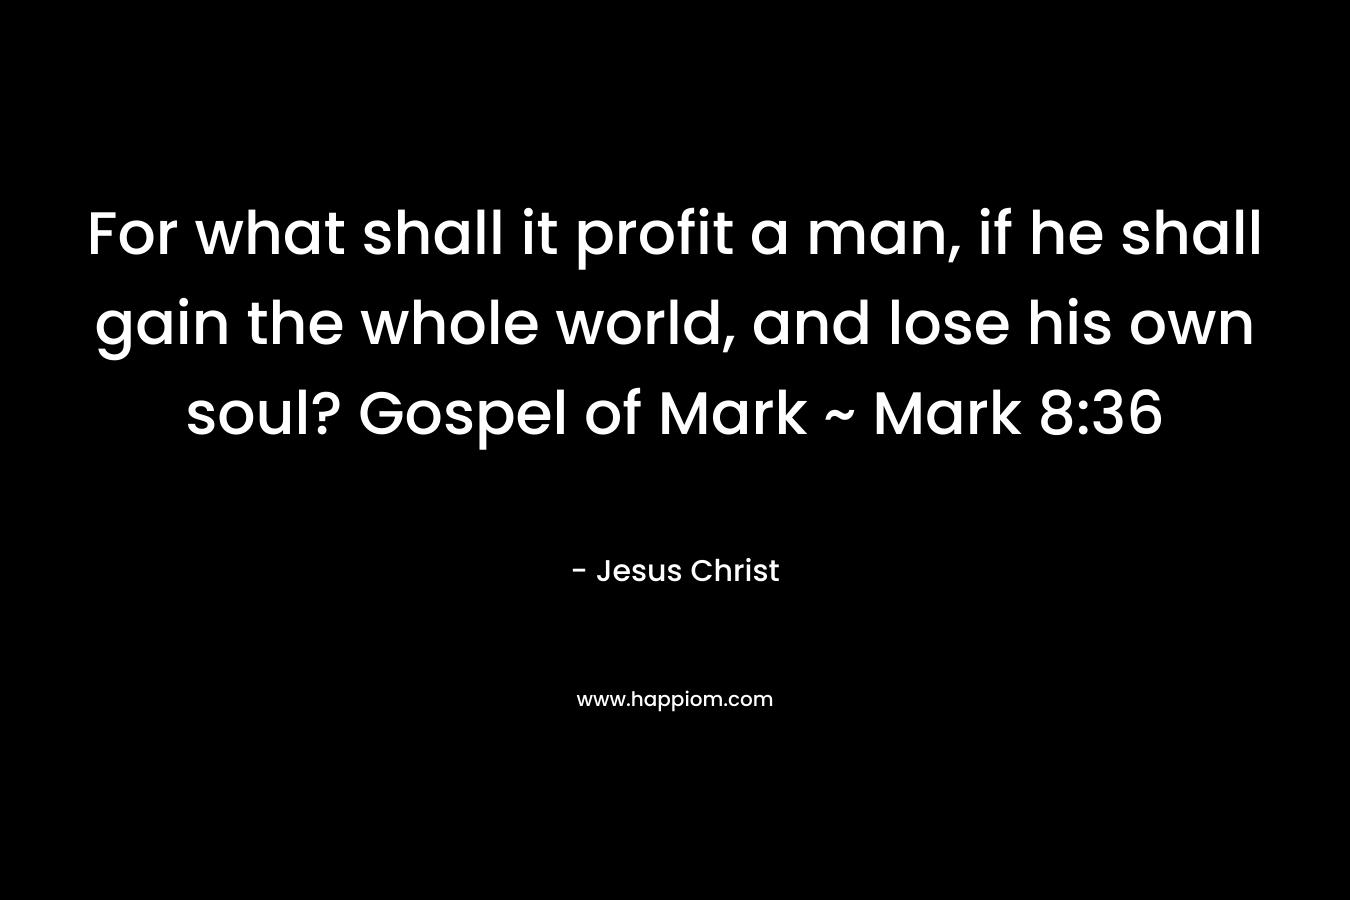 For what shall it profit a man, if he shall gain the whole world, and lose his own soul? Gospel of Mark ~ Mark 8:36